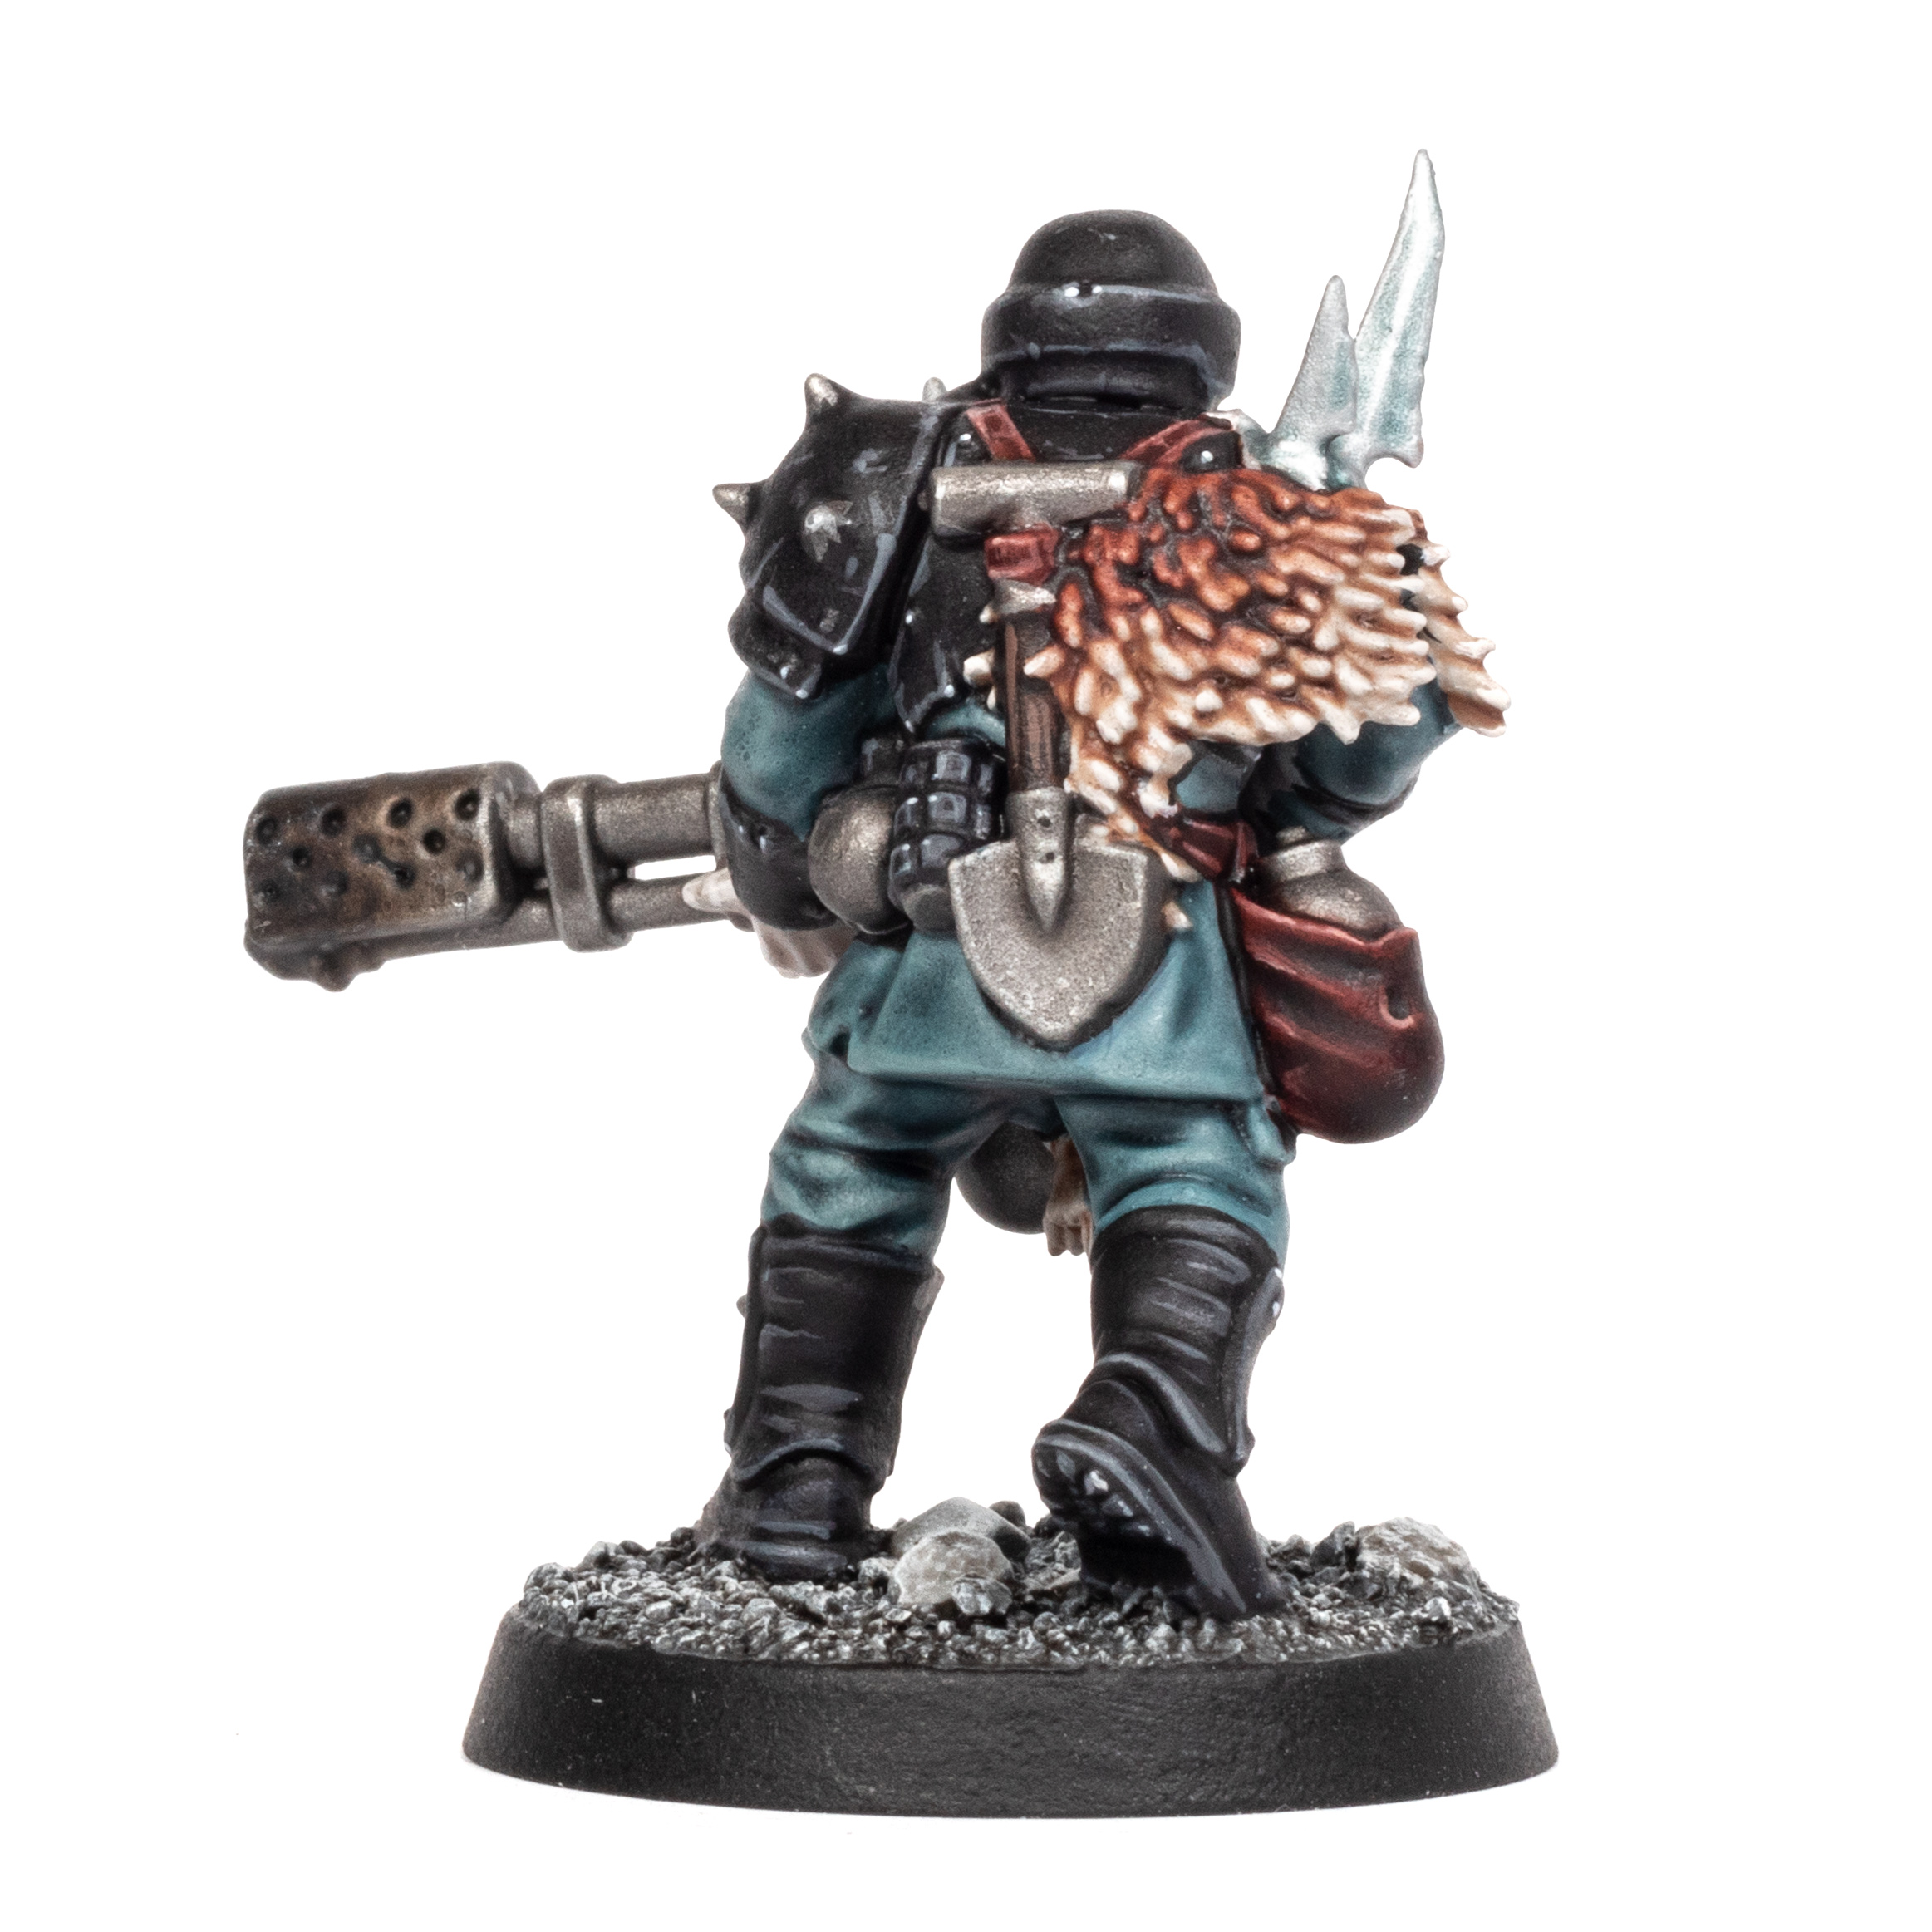 Traitor Guardsman with Flamer from Warhammer Quest: Blackstone Fortress, back view, painted by Stahly